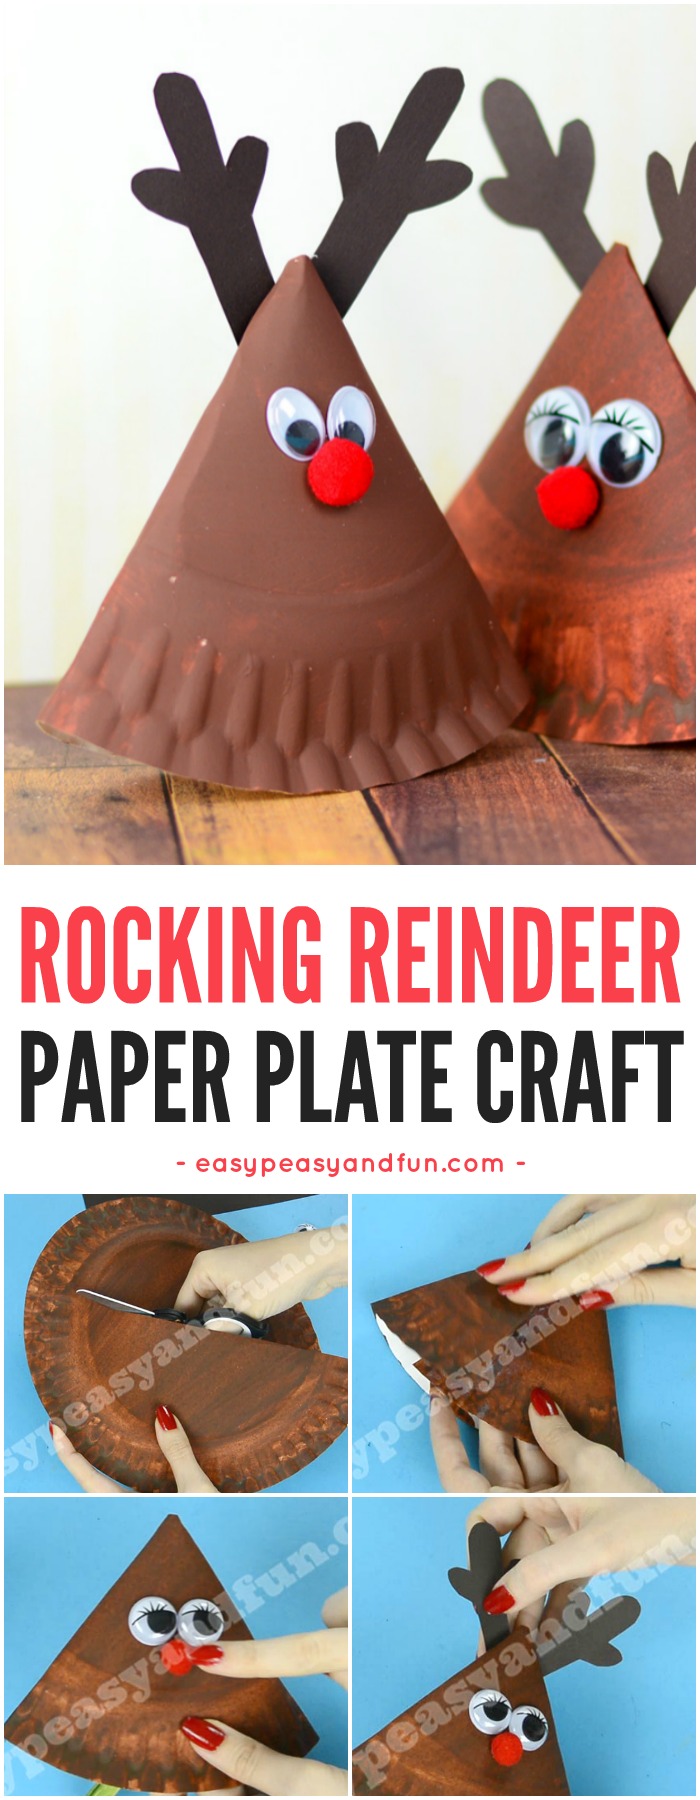 Cute Rocking Paper Plate Reindeer Craft for Kids. Super Fun Christmas Craft Idea for Kids to Make.